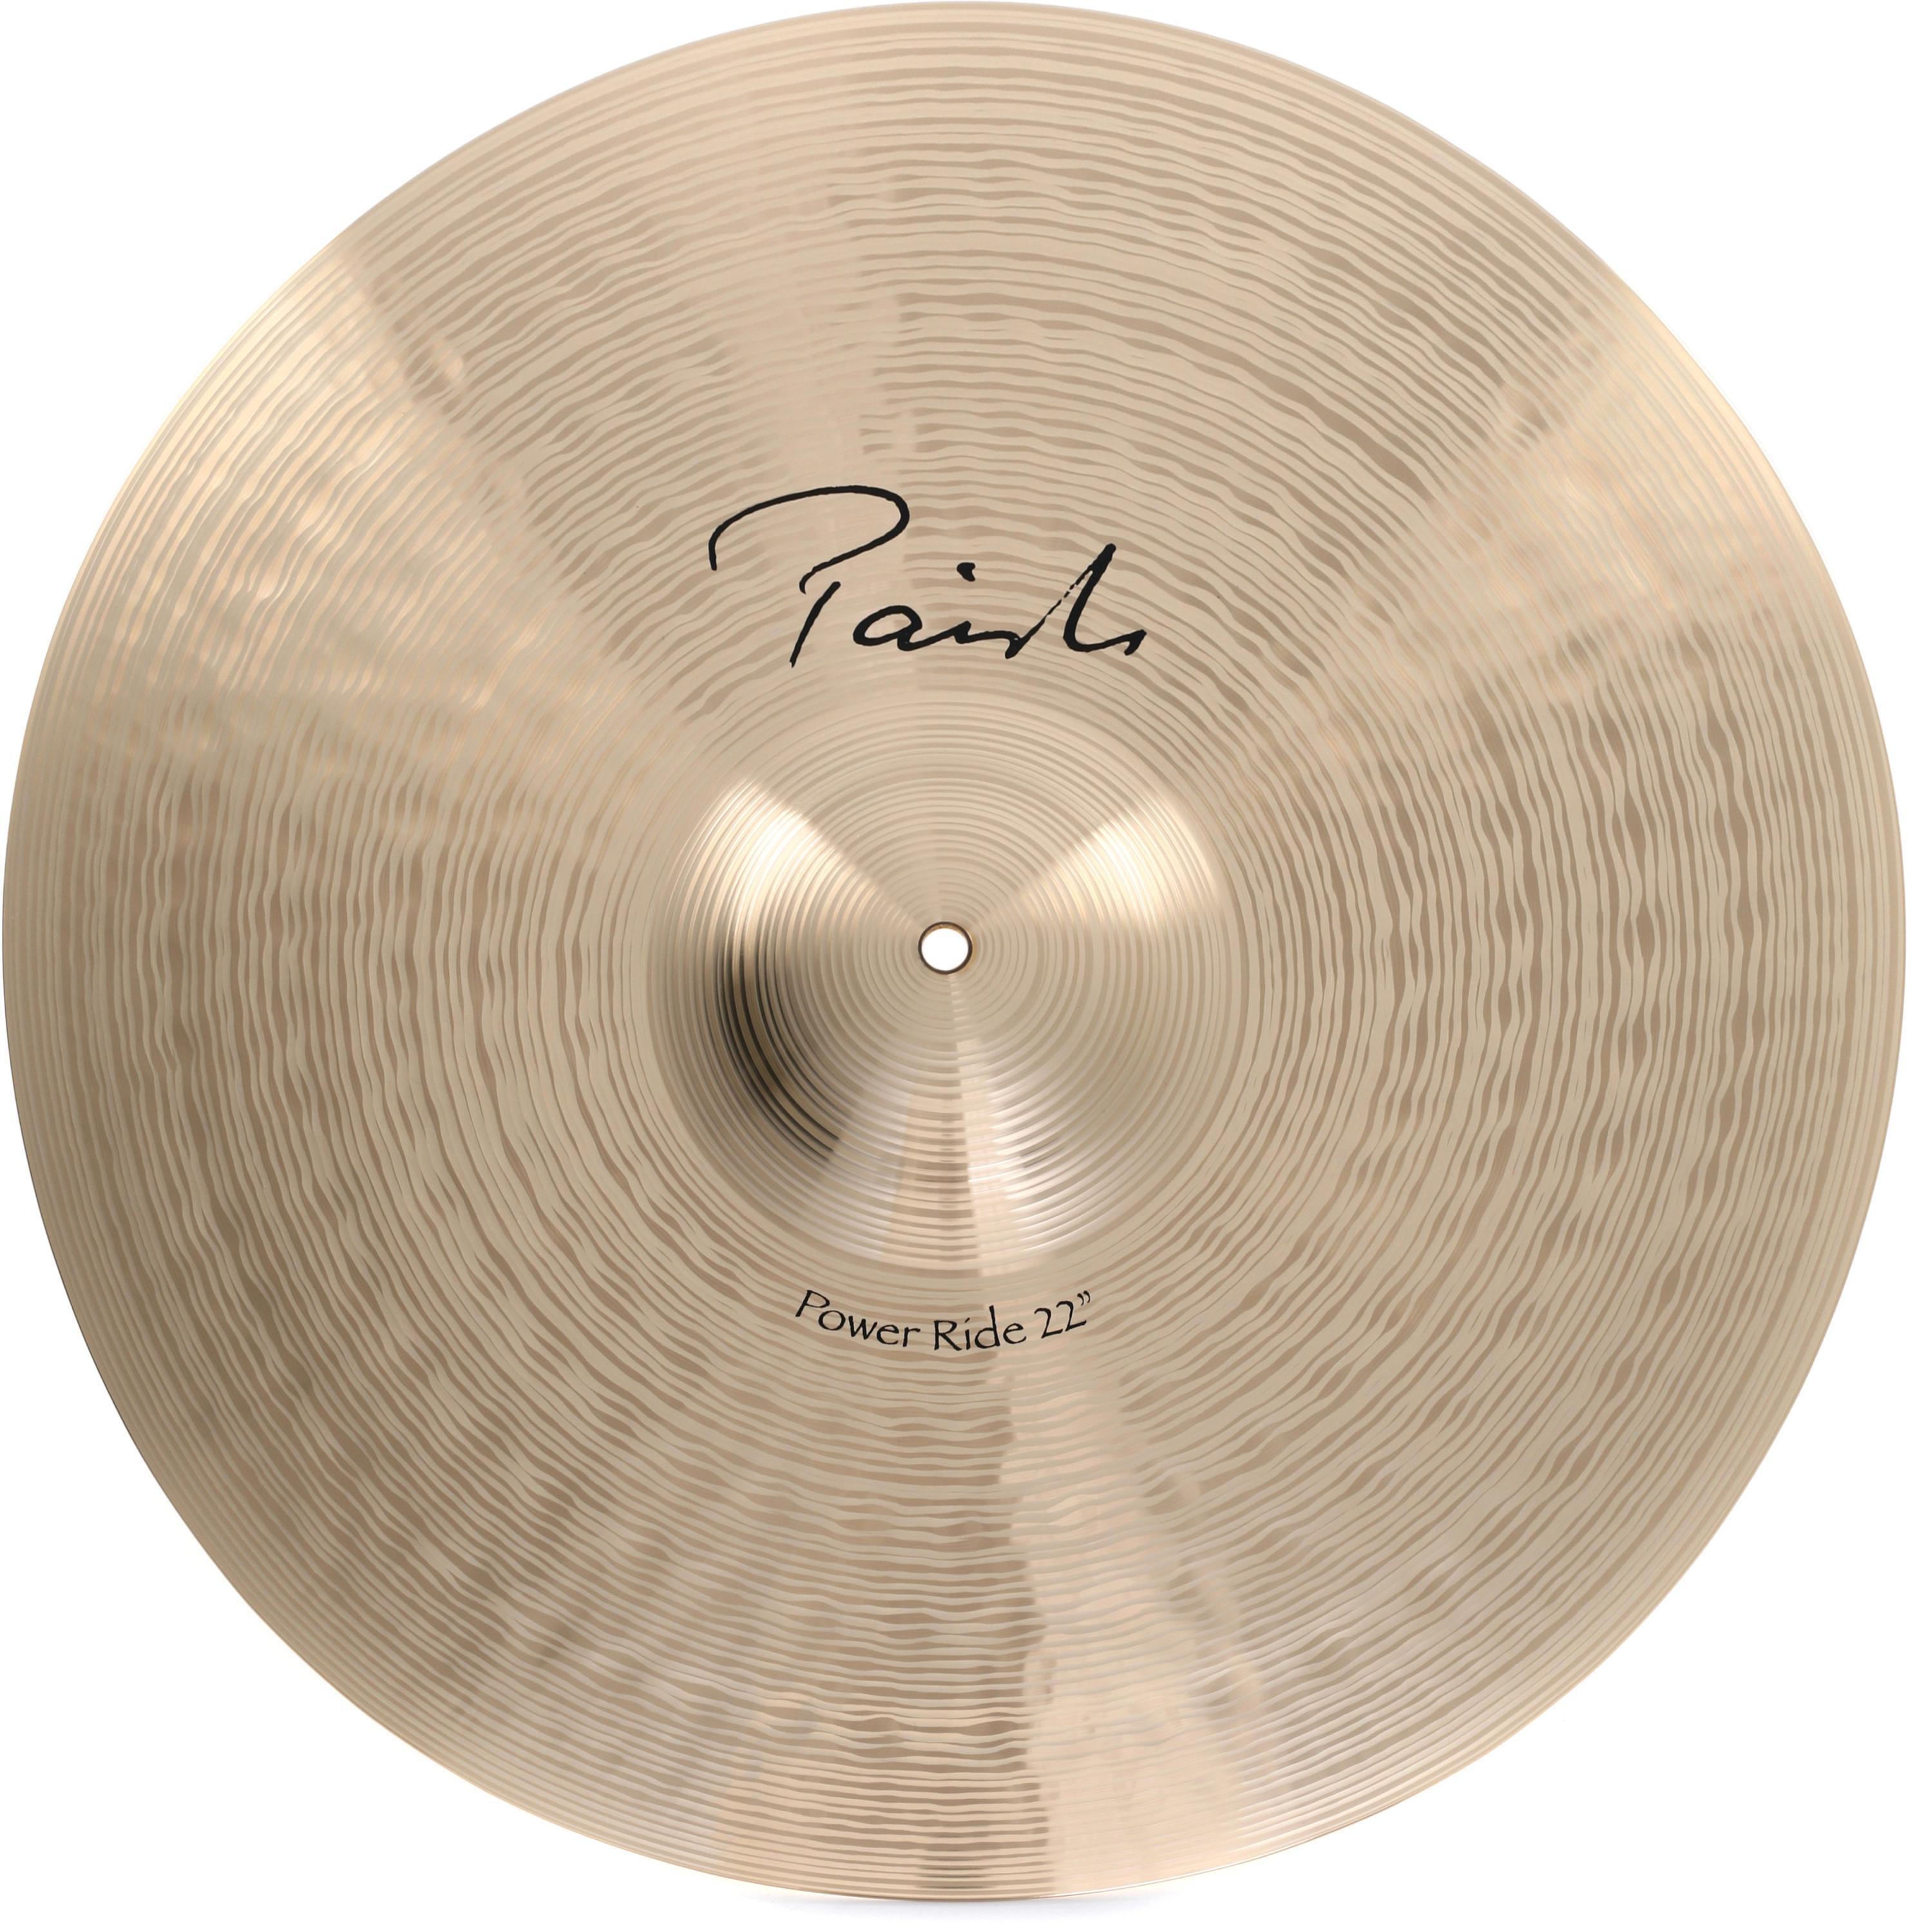 Paiste Signature Power Ride Cymbal - 22 inch | Sweetwater